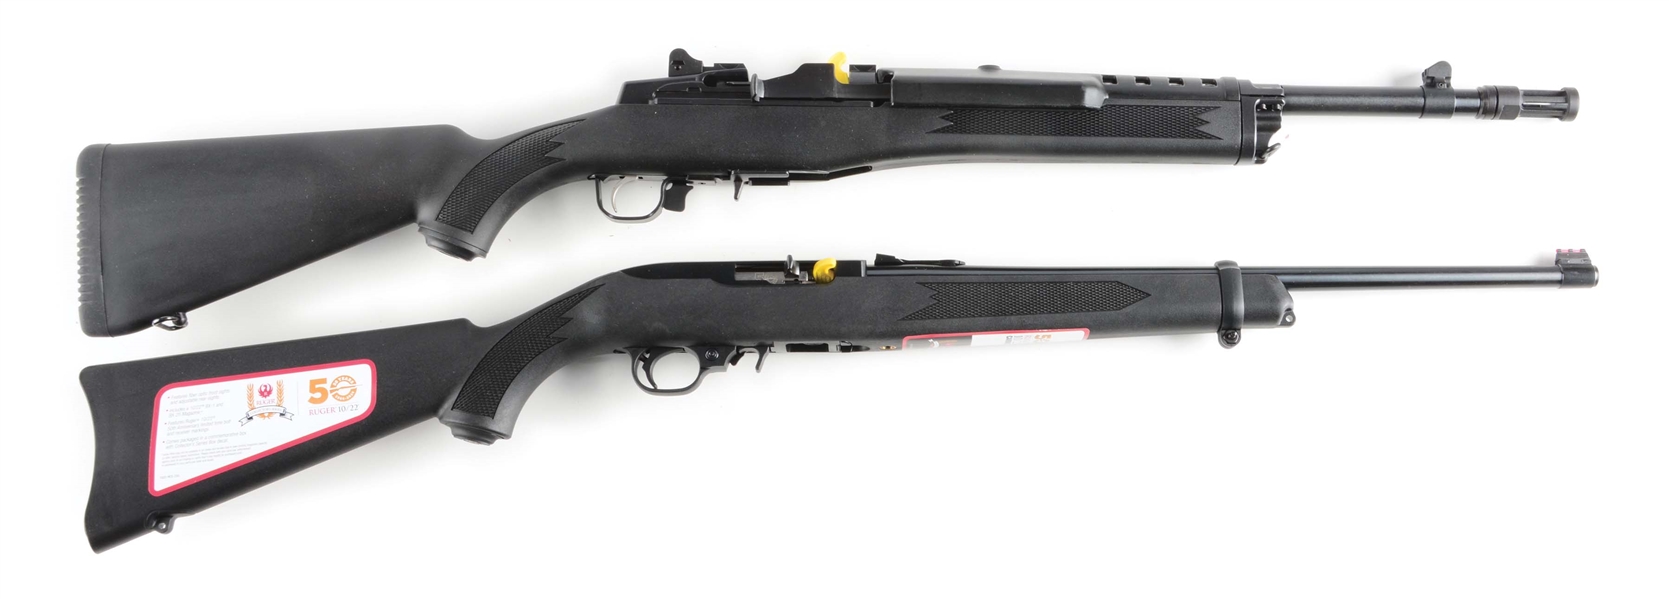 (M) LOT OF 2: BOXED RUGER SEMI-AUTOMATIC RIFLES.